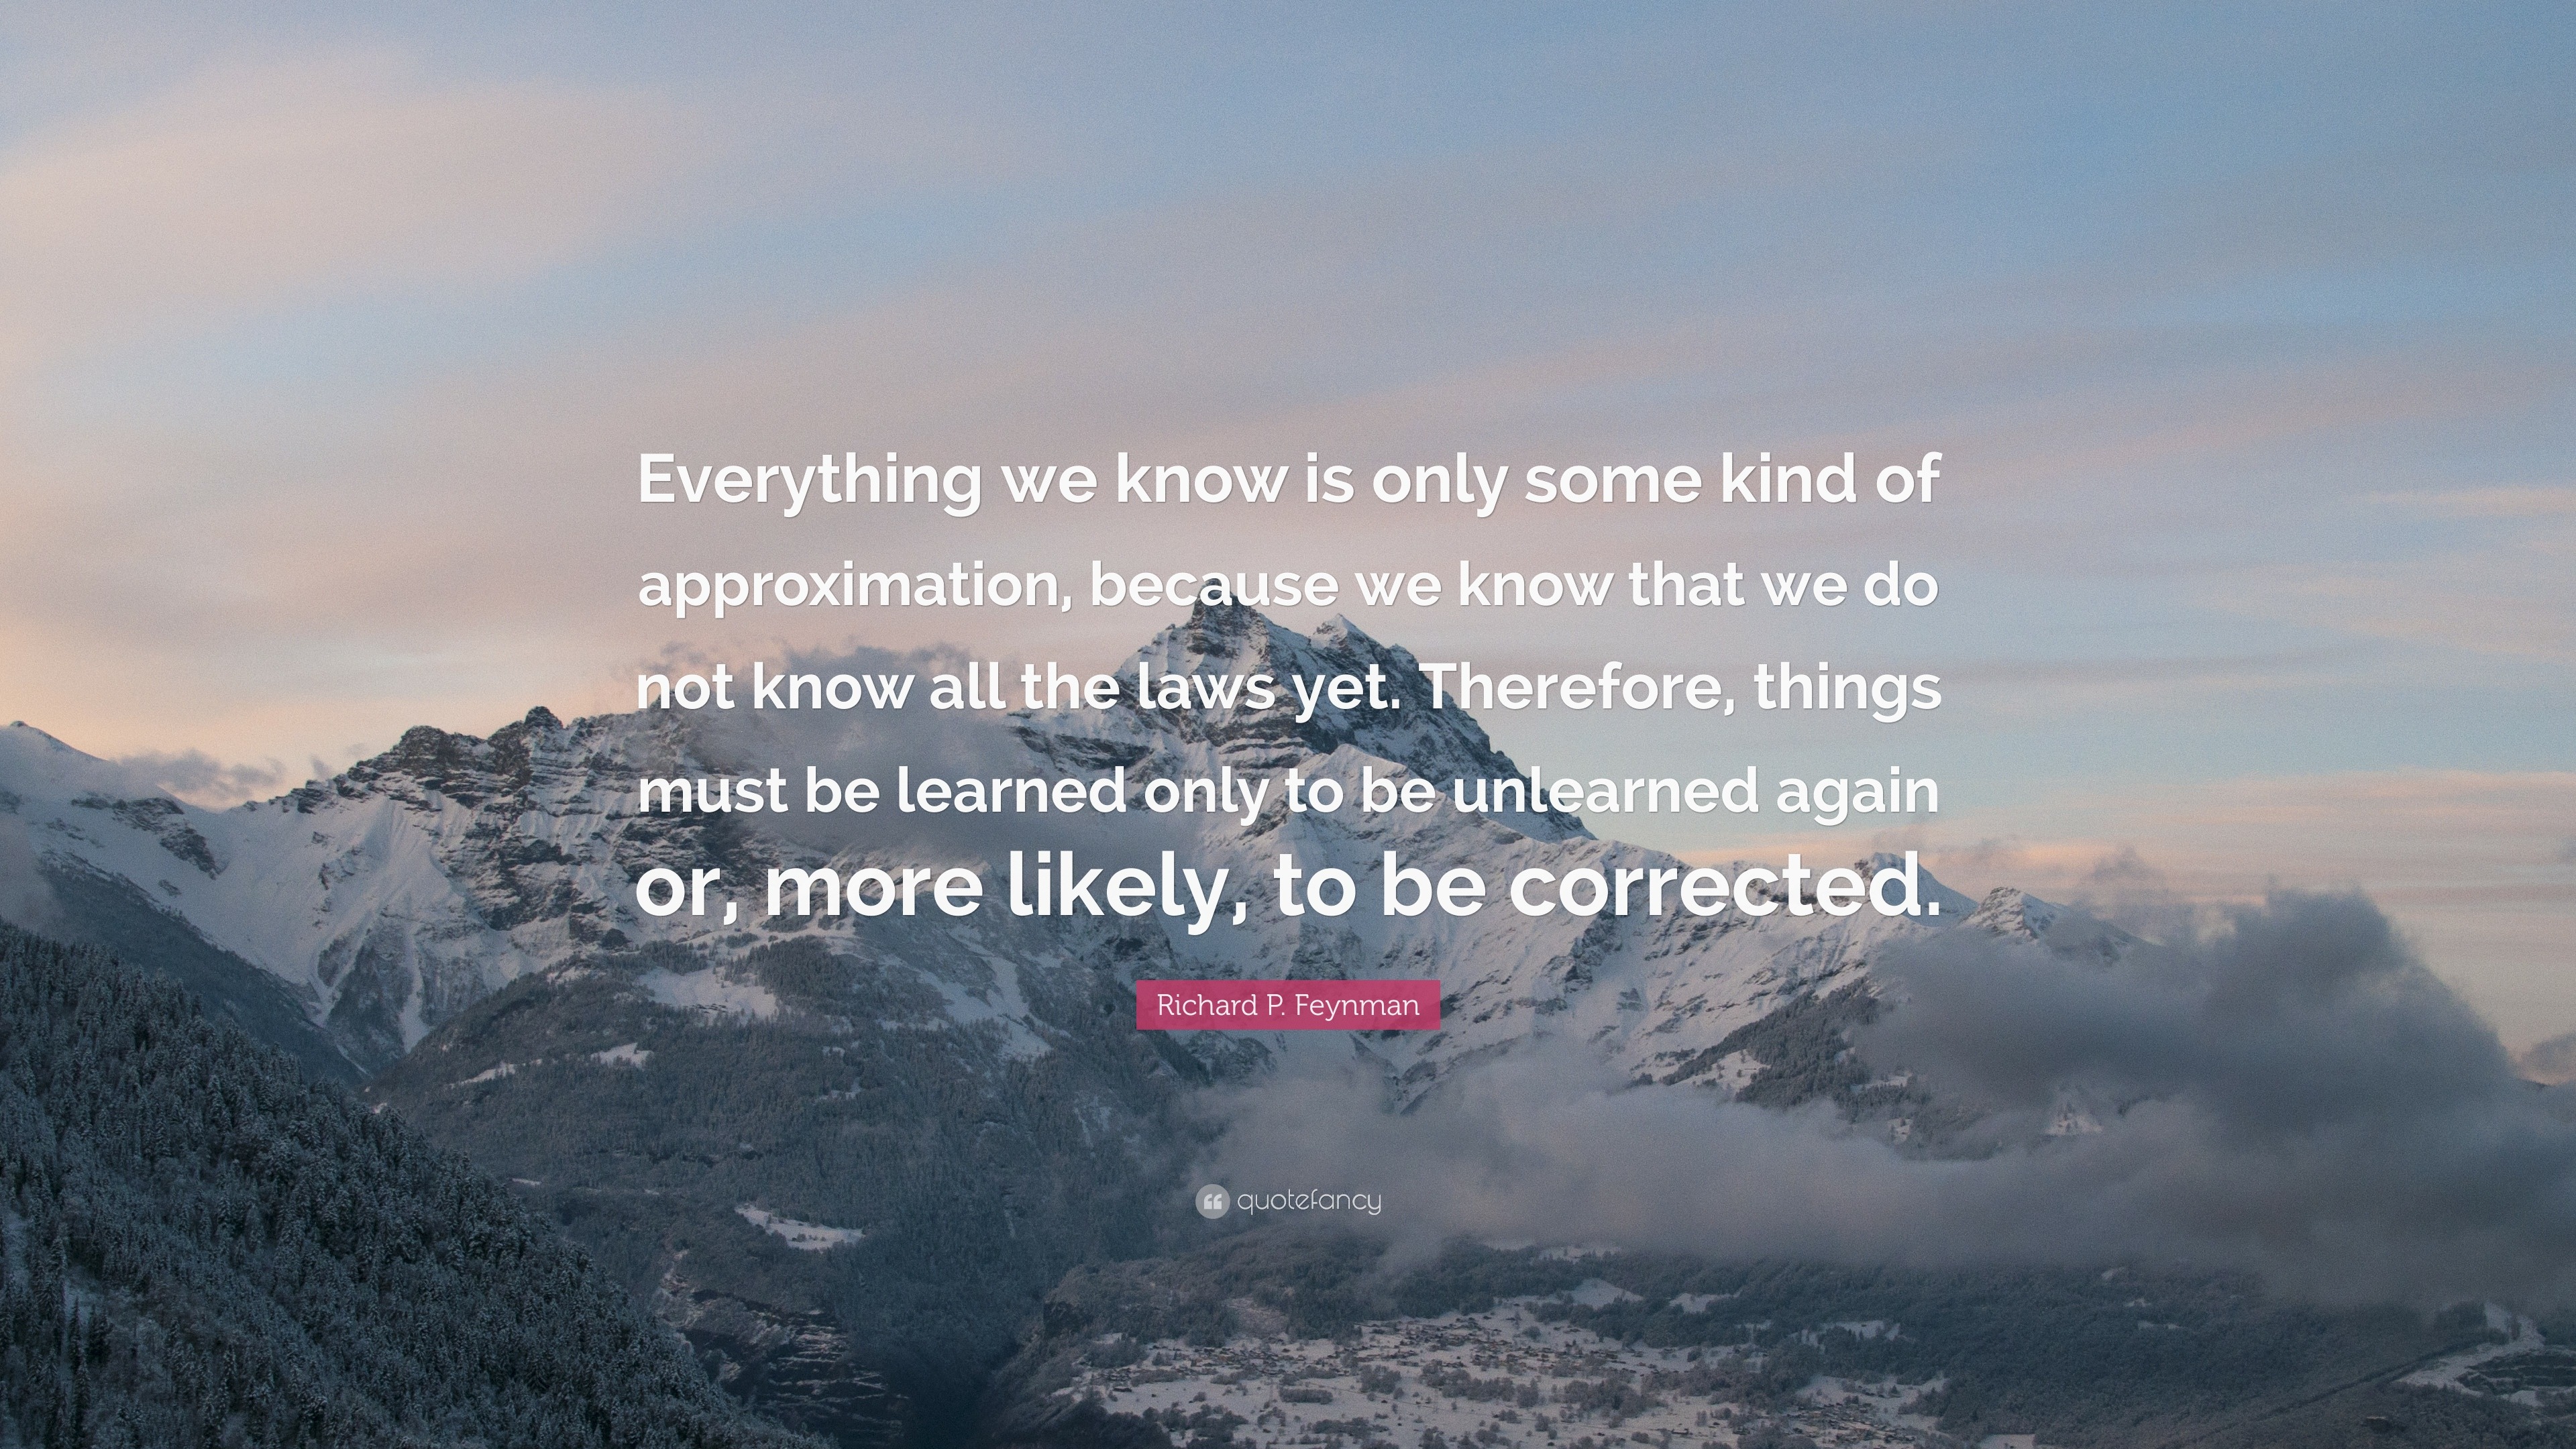 Richard P. Feynman Quote: “Everything we know is only some kind of ...